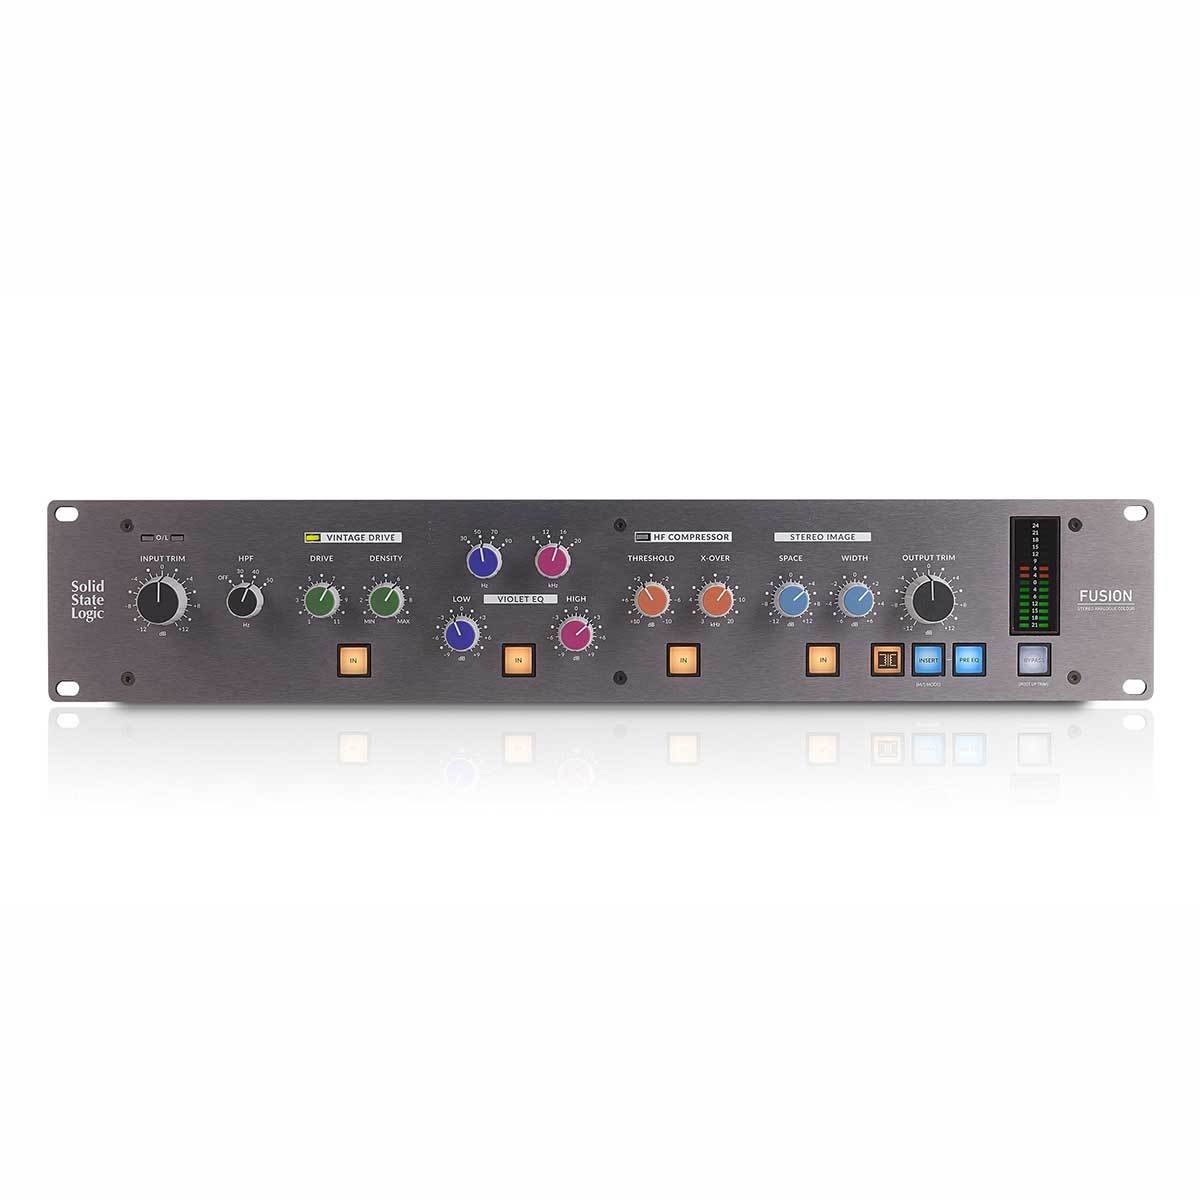 EQ - Solid State Logic Fusion Stereo Analogue Processor